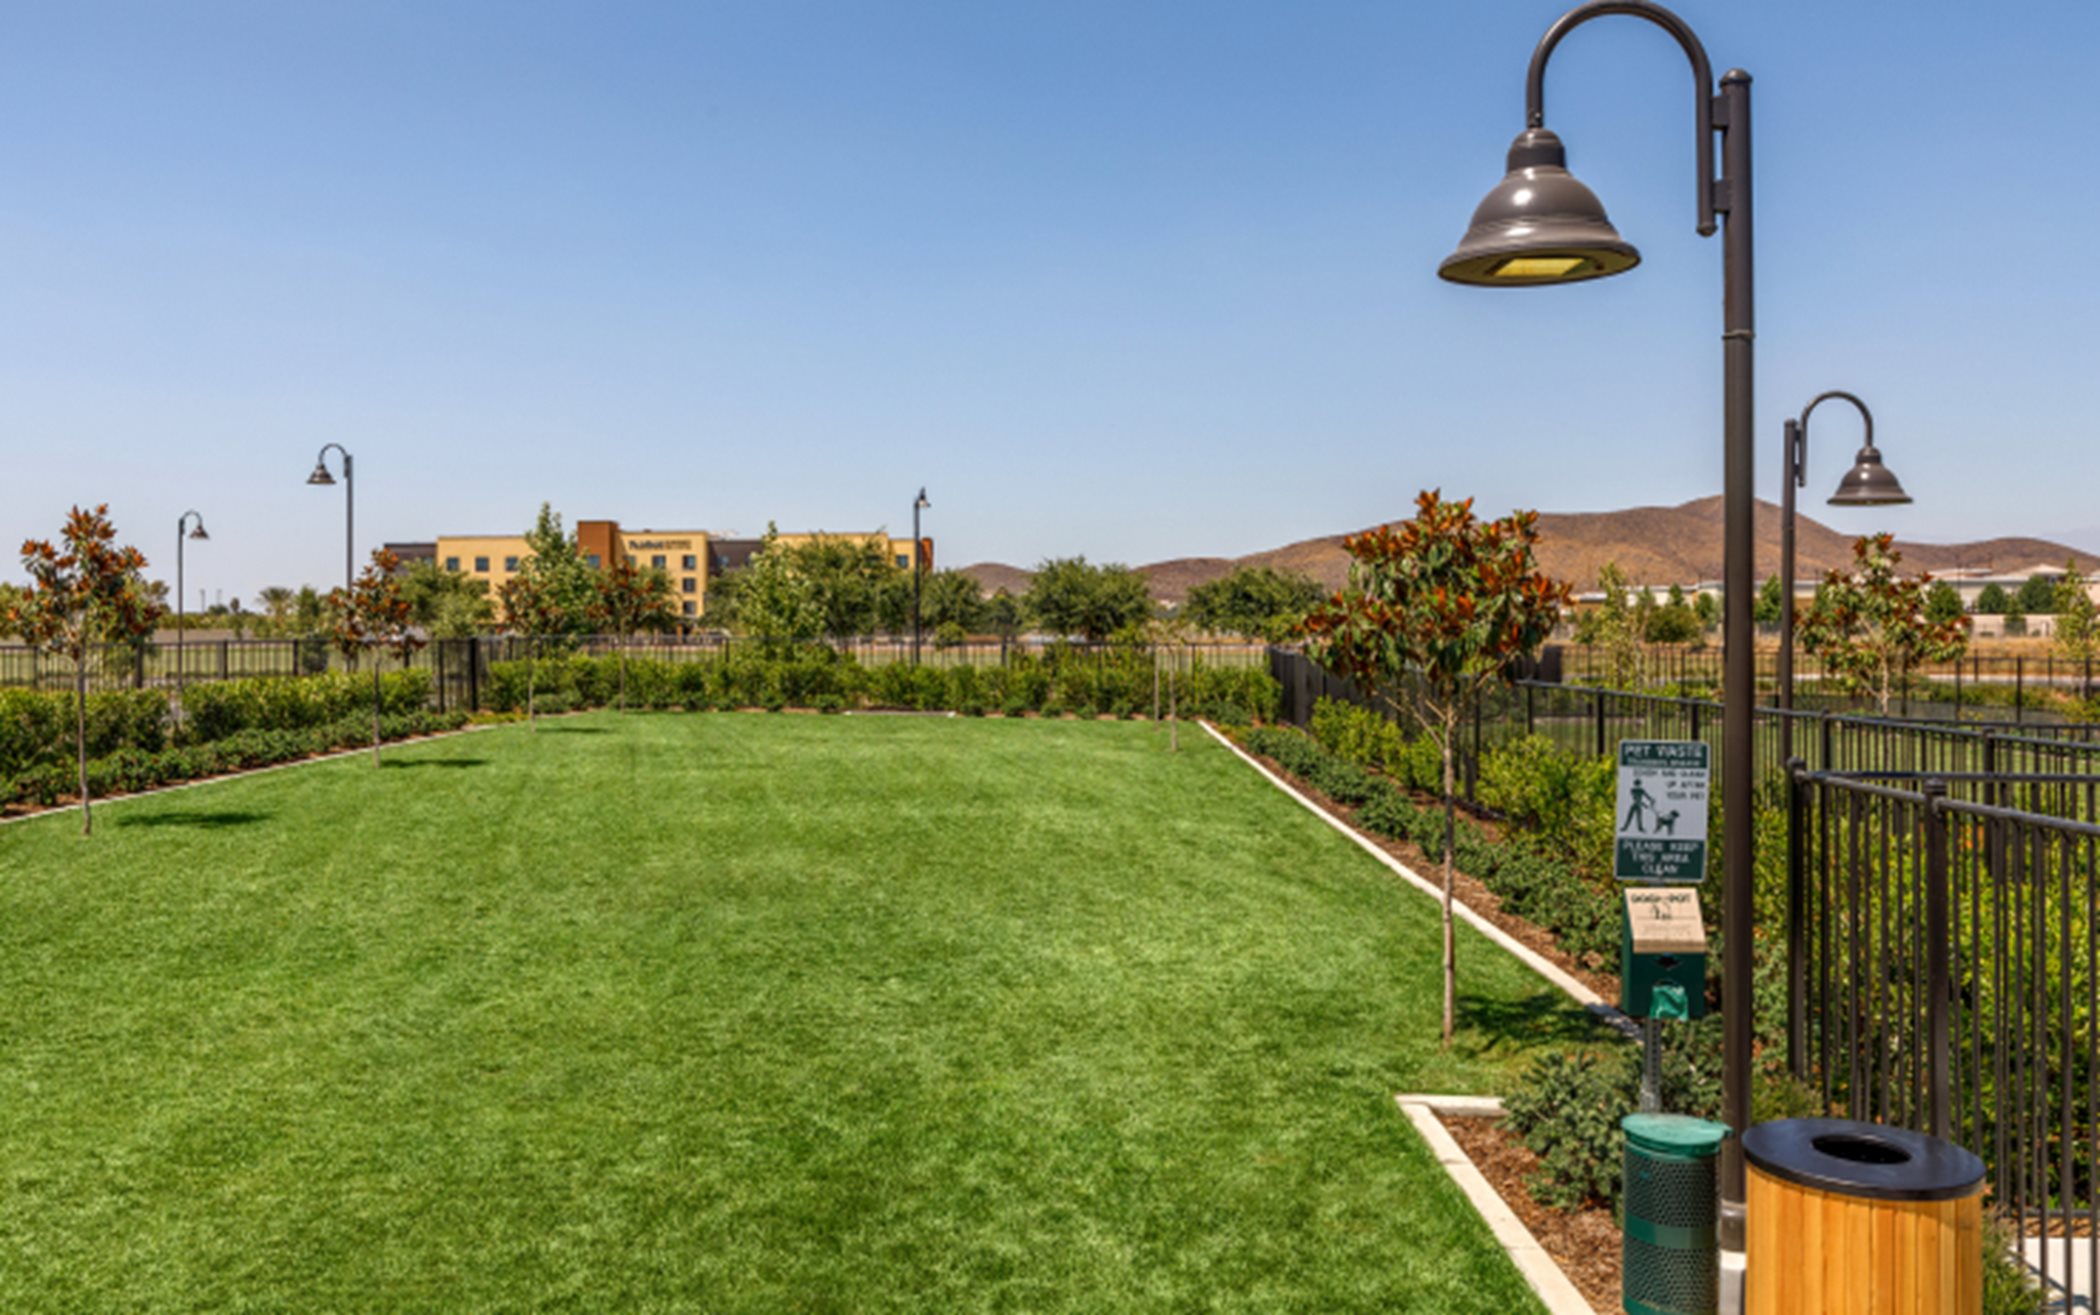 Menifee Town Center Central Park offers five acres with tot lots